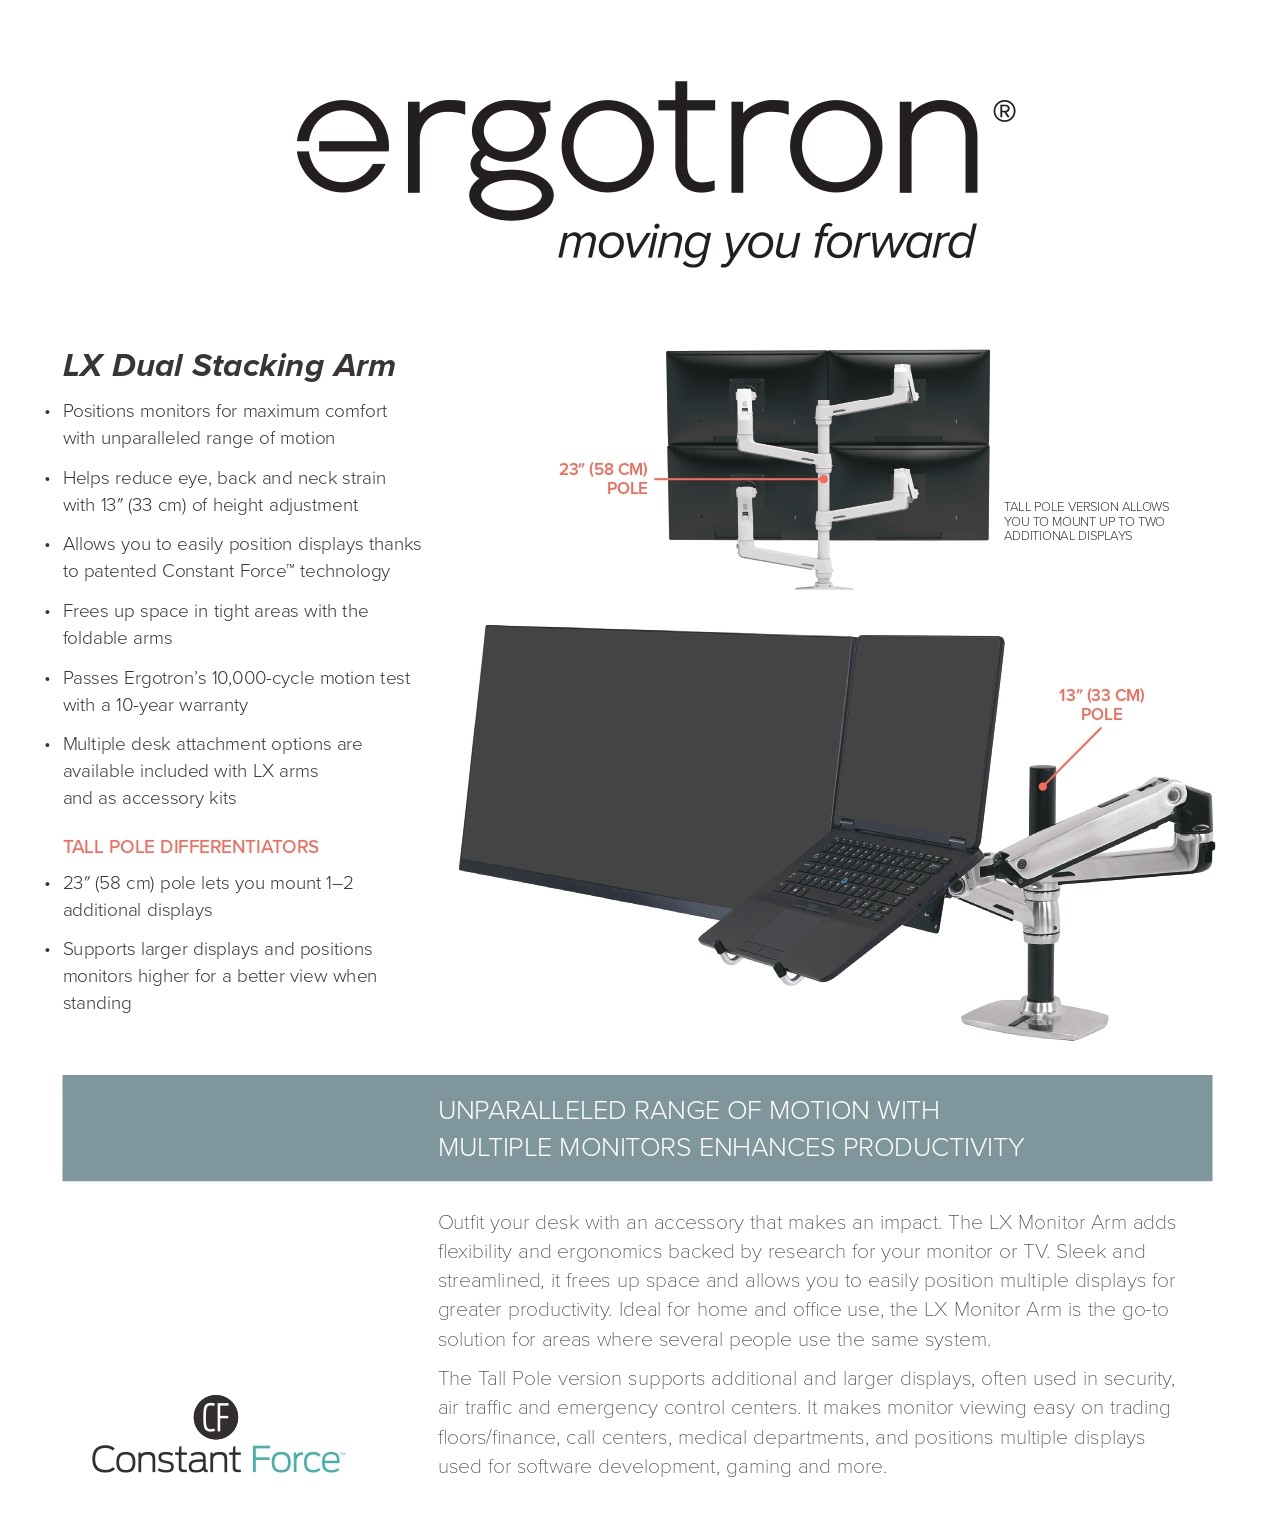 A large marketing image providing additional information about the product Ergotron LX Dual Stacking Arm Tall Pole - White - Additional alt info not provided